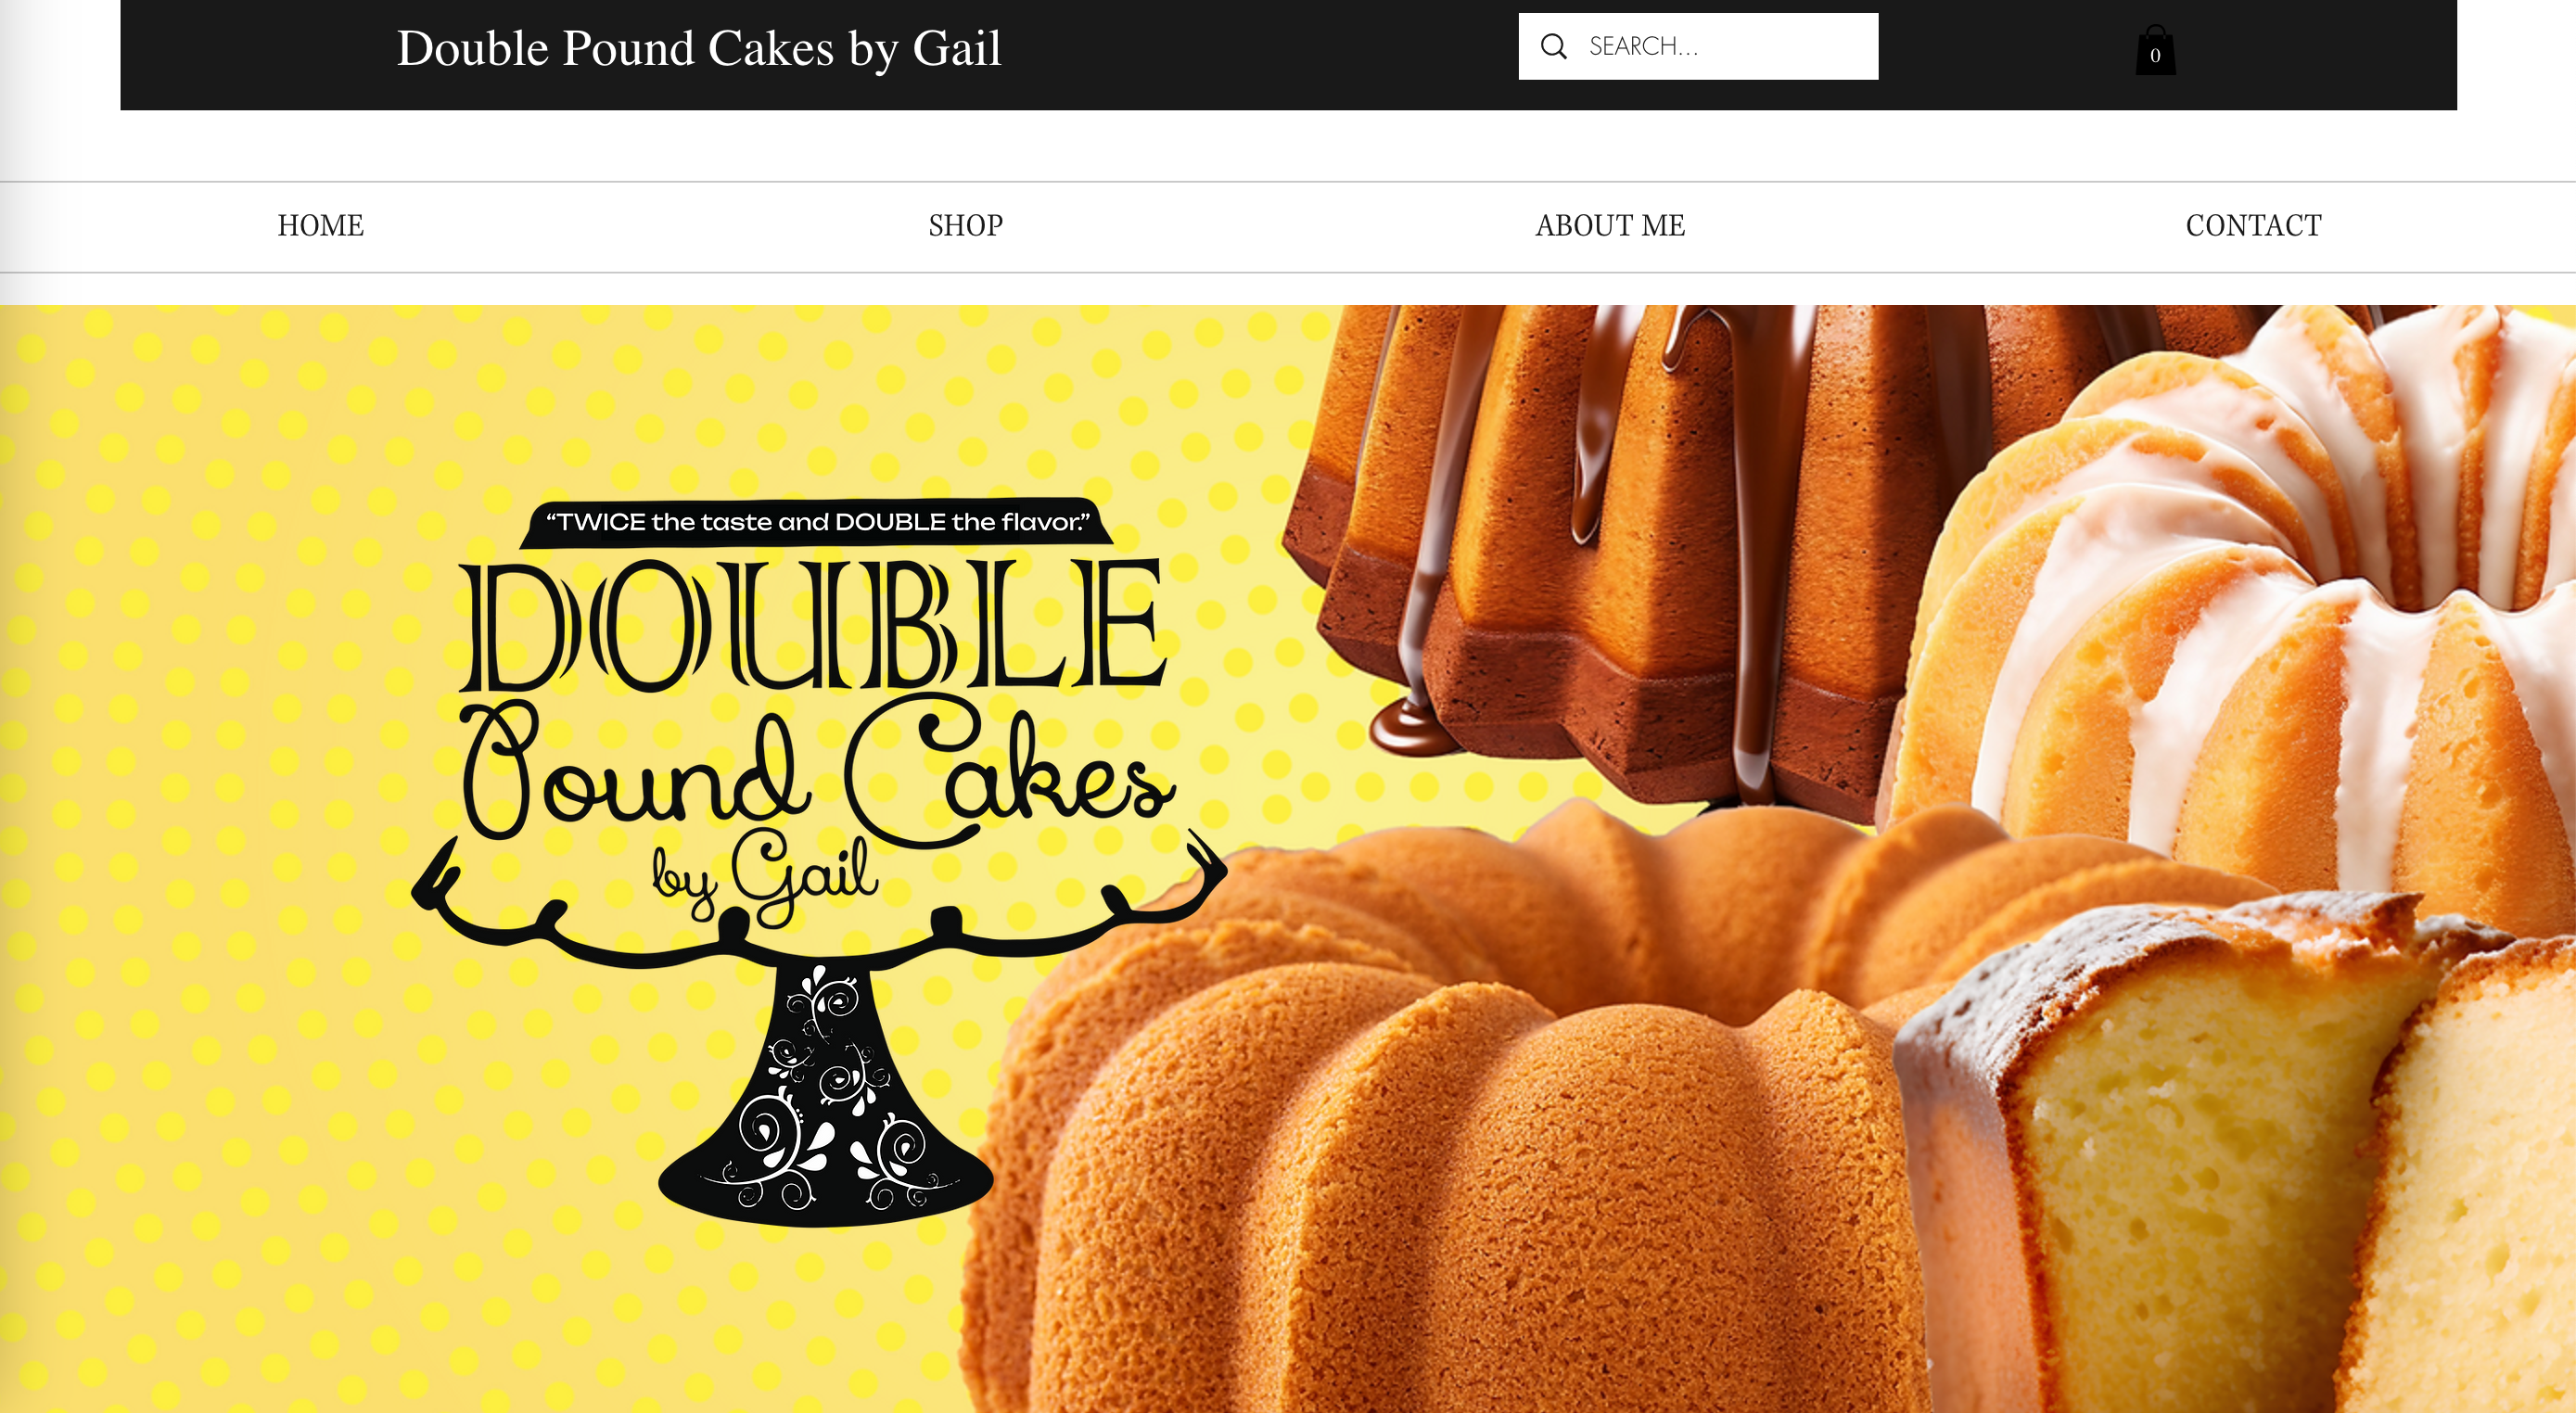 Double Pound Cakes by Gail